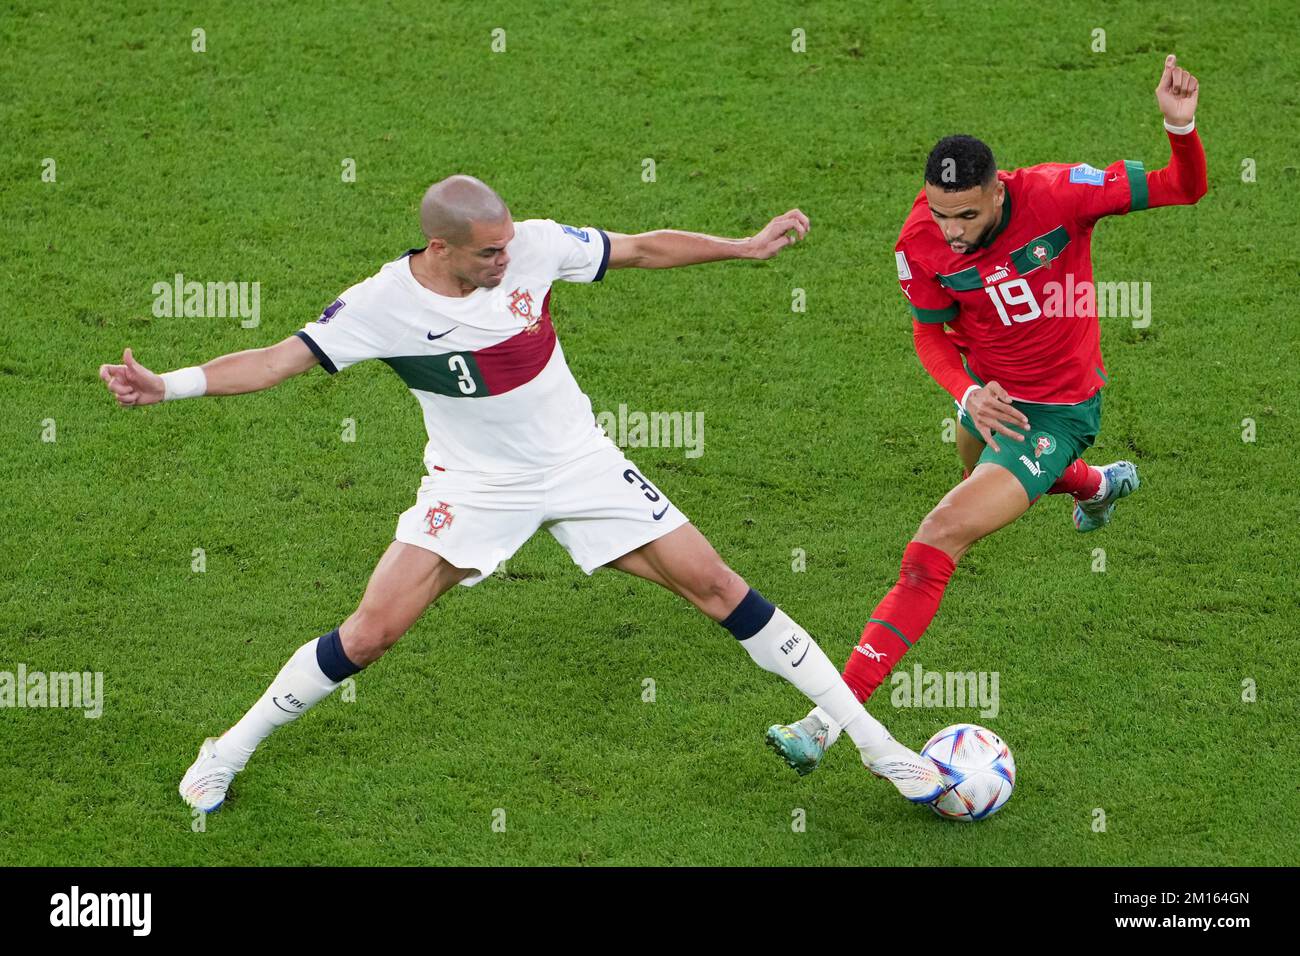 Doha, Qatar. 10th Dec, 2022. Pepe (L) of Portugal vies with Youssef En-Nesyri of Morocco during their Quarterfinal of the 2022 FIFA World Cup at Al Thumama Stadium in Doha, Qatar, Dec. 10, 2022. Credit: Zheng Huansong/Xinhua/Alamy Live News Stock Photo